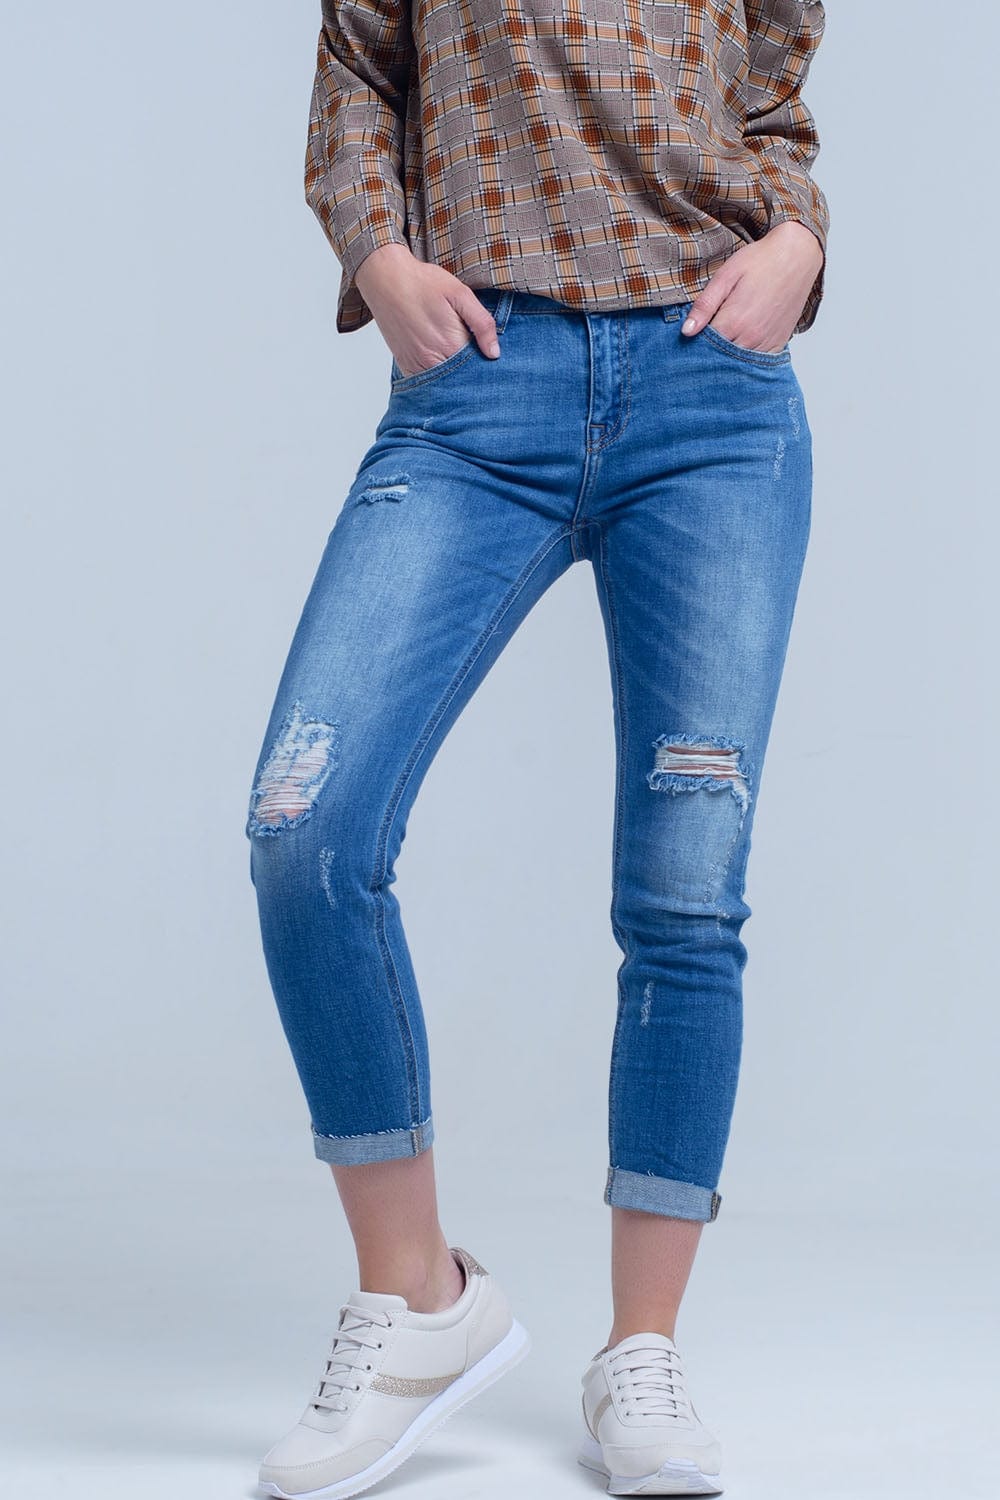 Q2 Women's Jean Jean skinny with rips on the legs